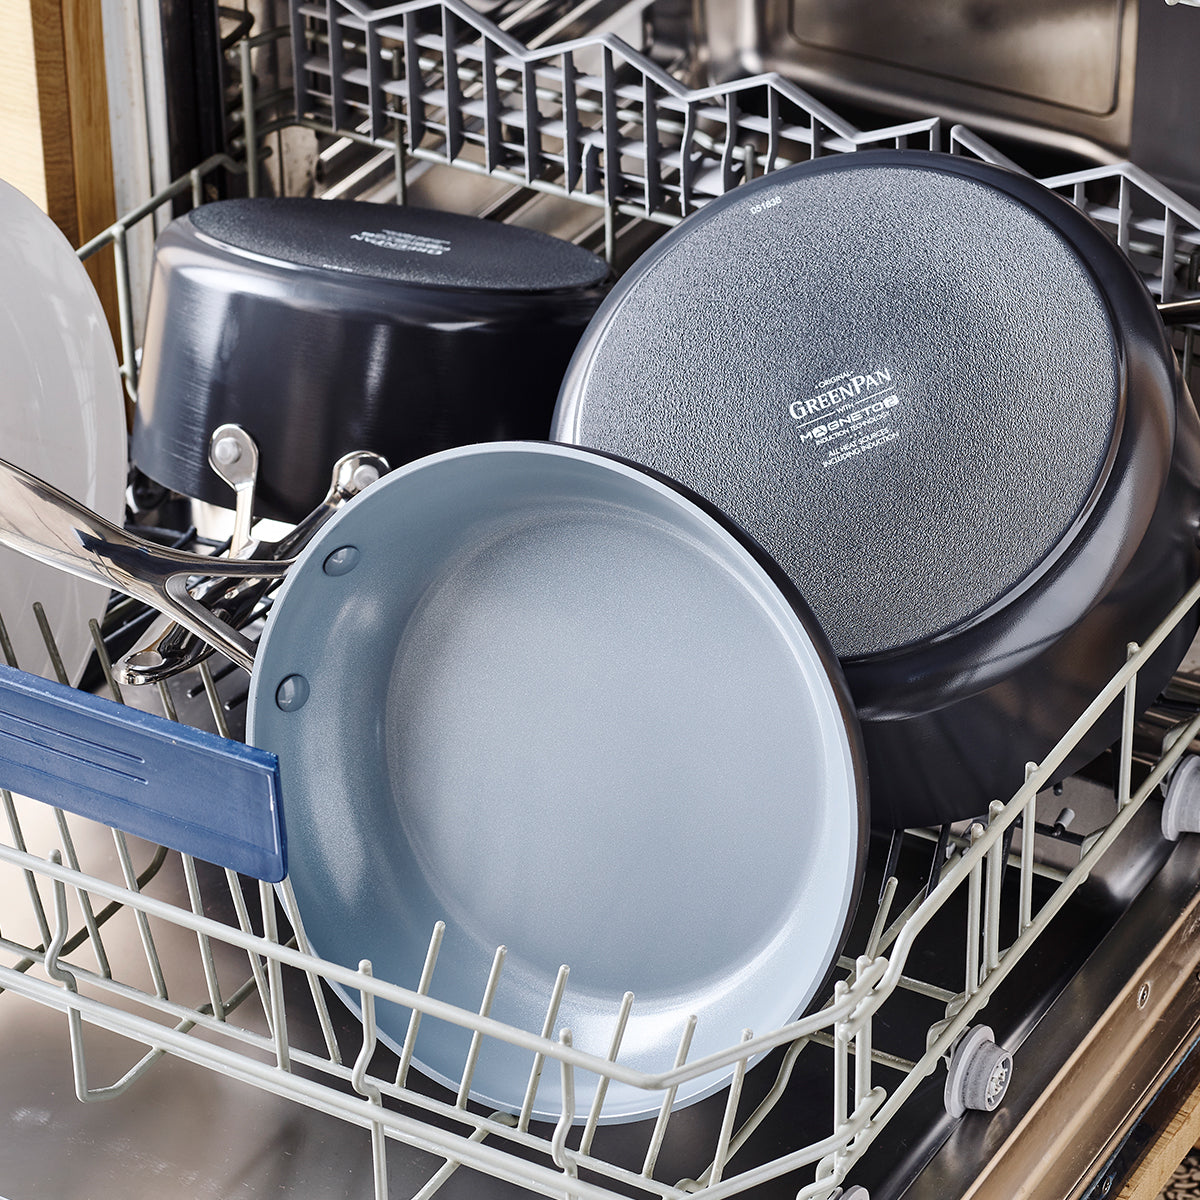 cookware in open dishwasher.